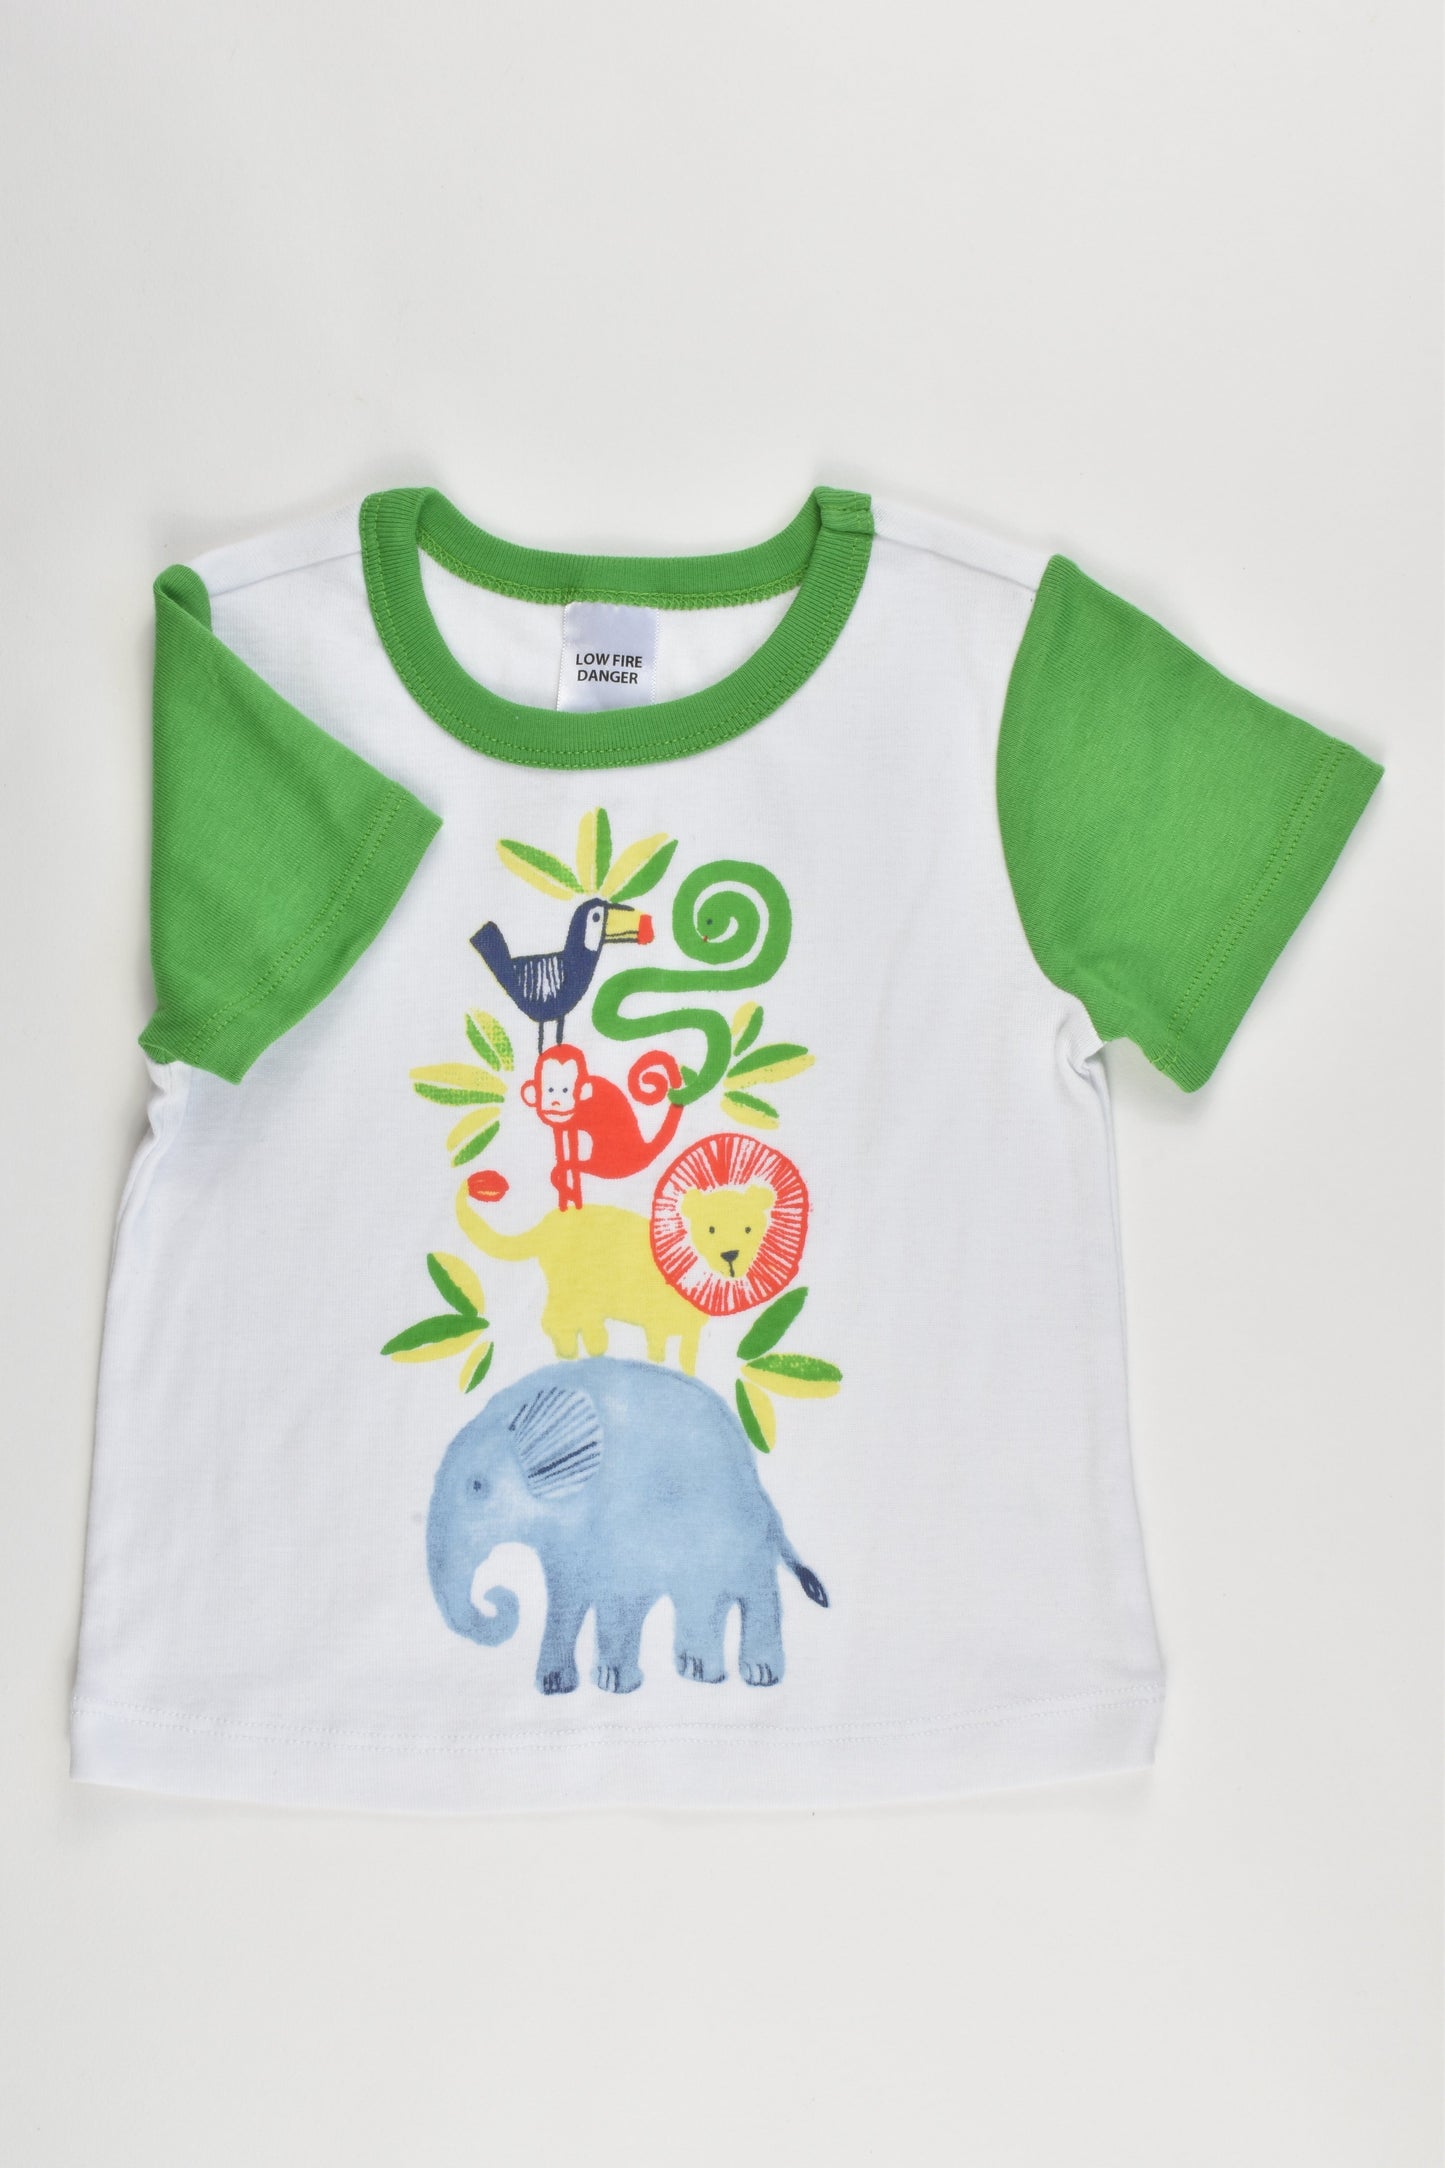 NEW Mix Baby Size 0 T-shirt